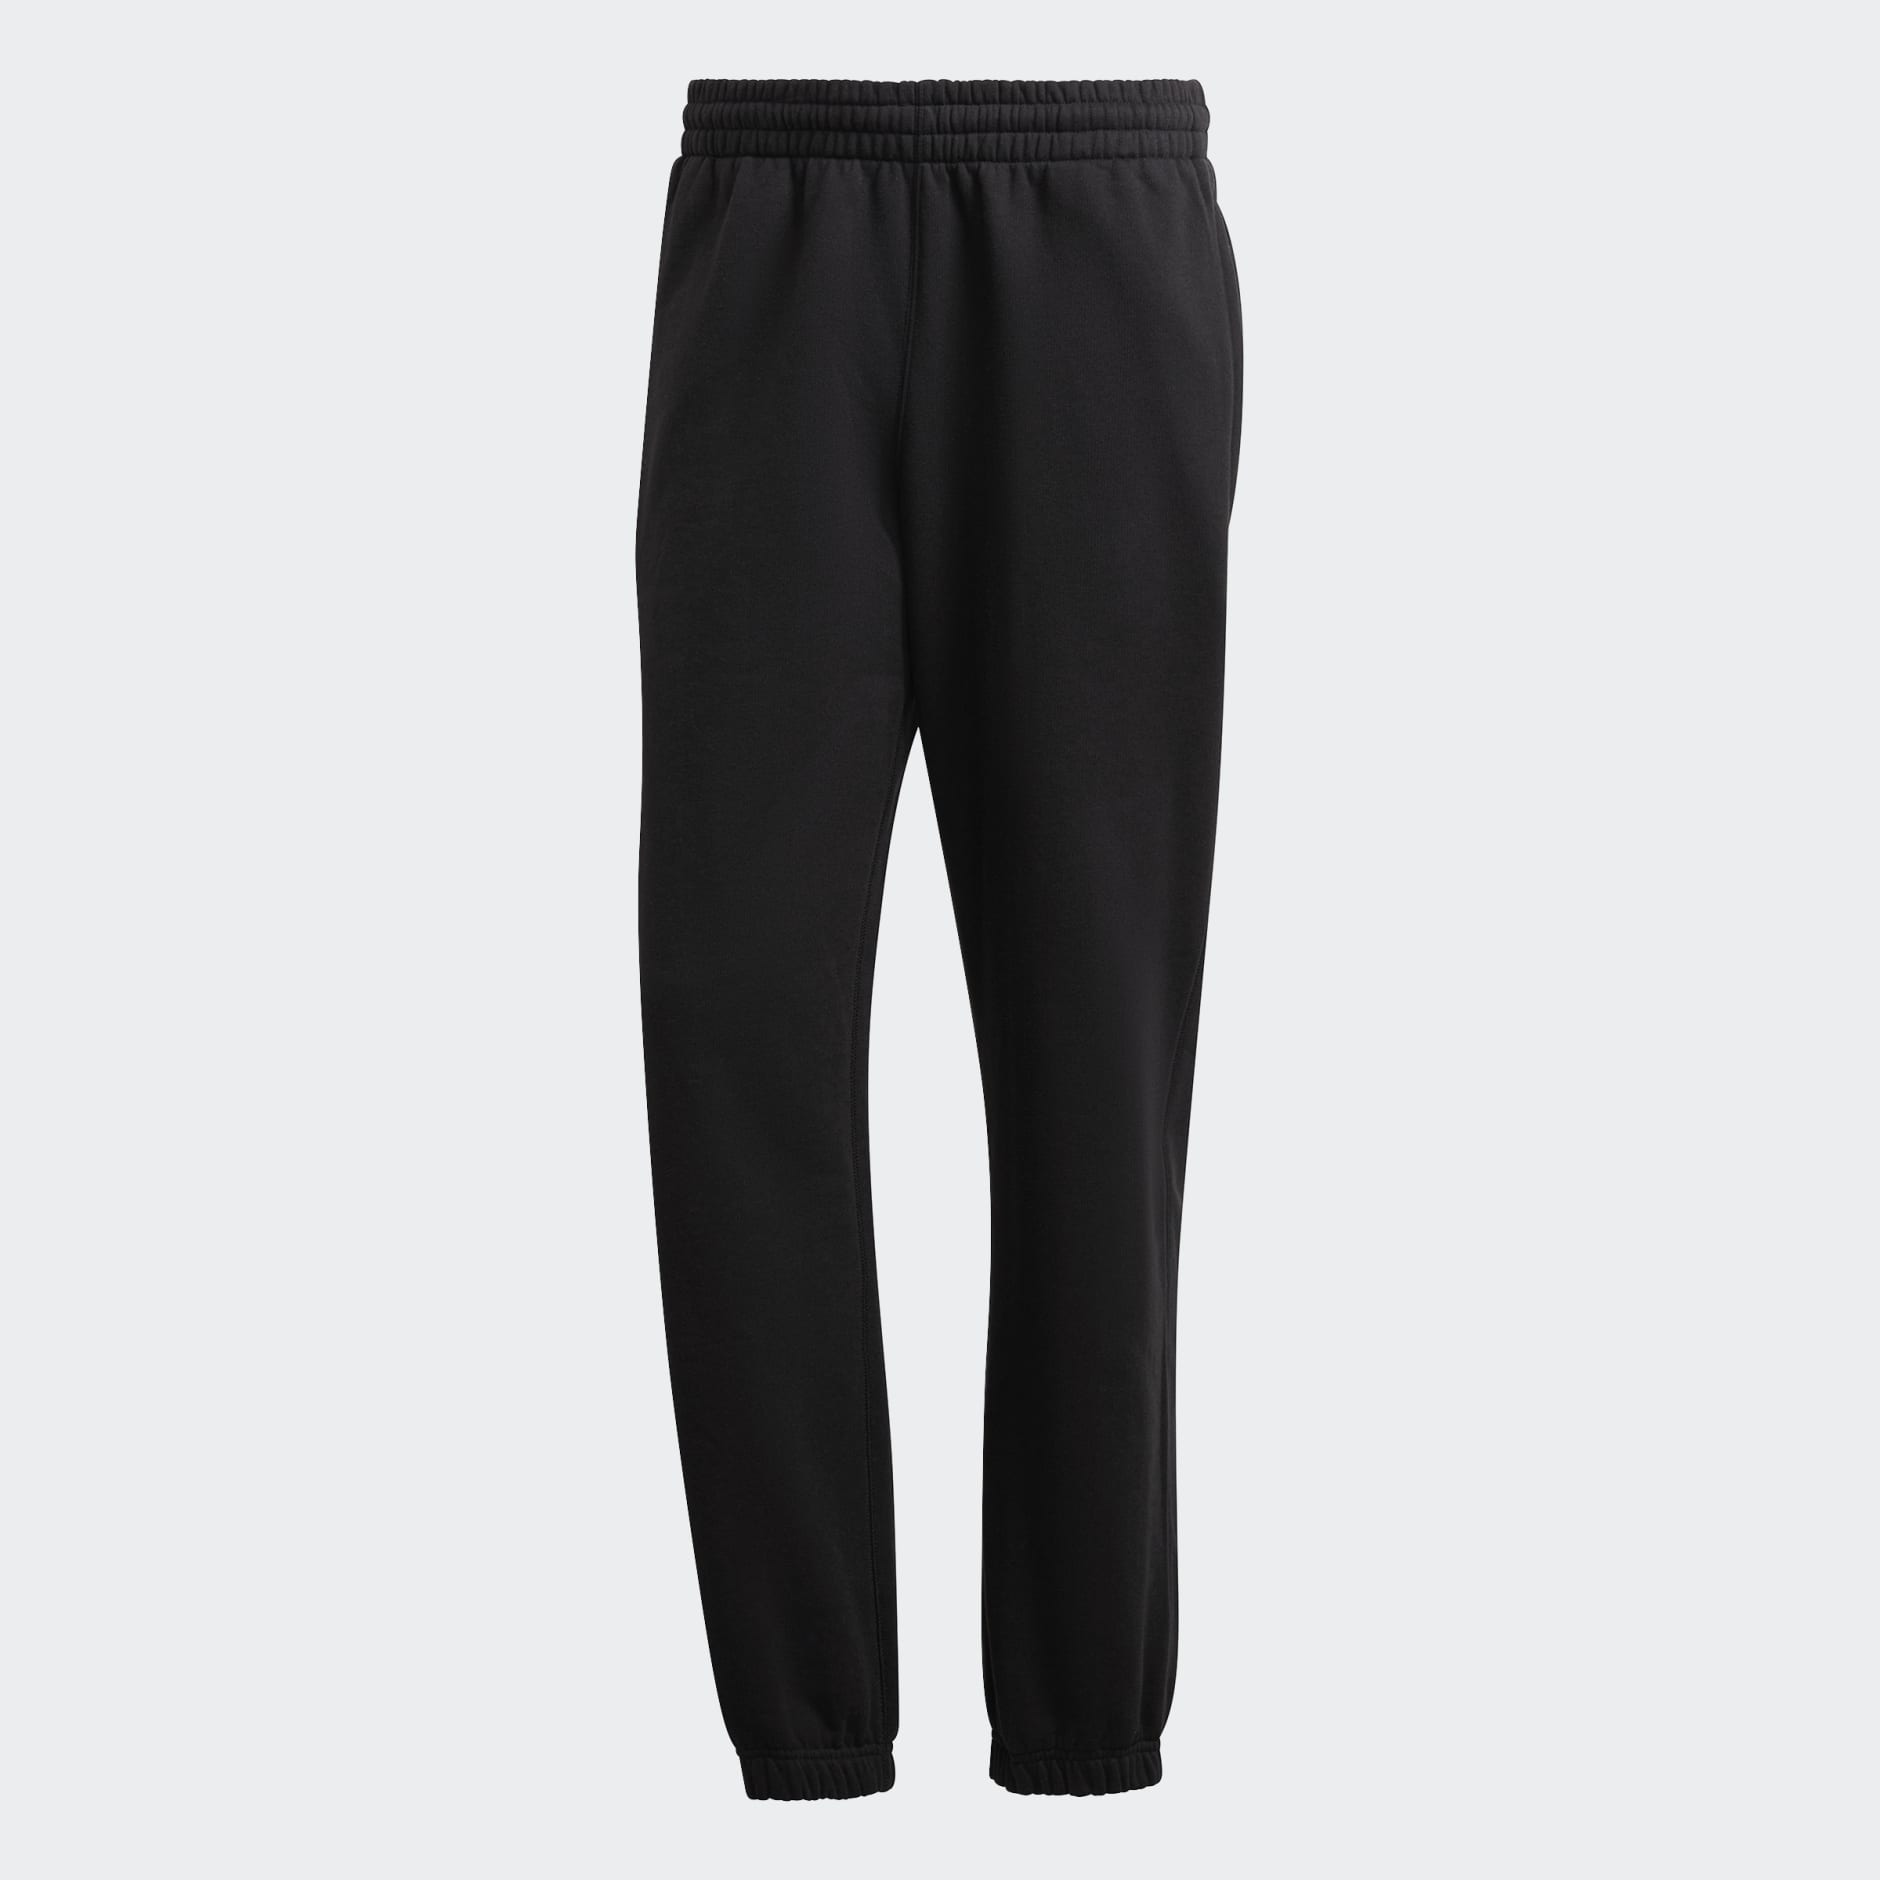 adidas Adicolor Contempo French Terry Sweat Pants - Black